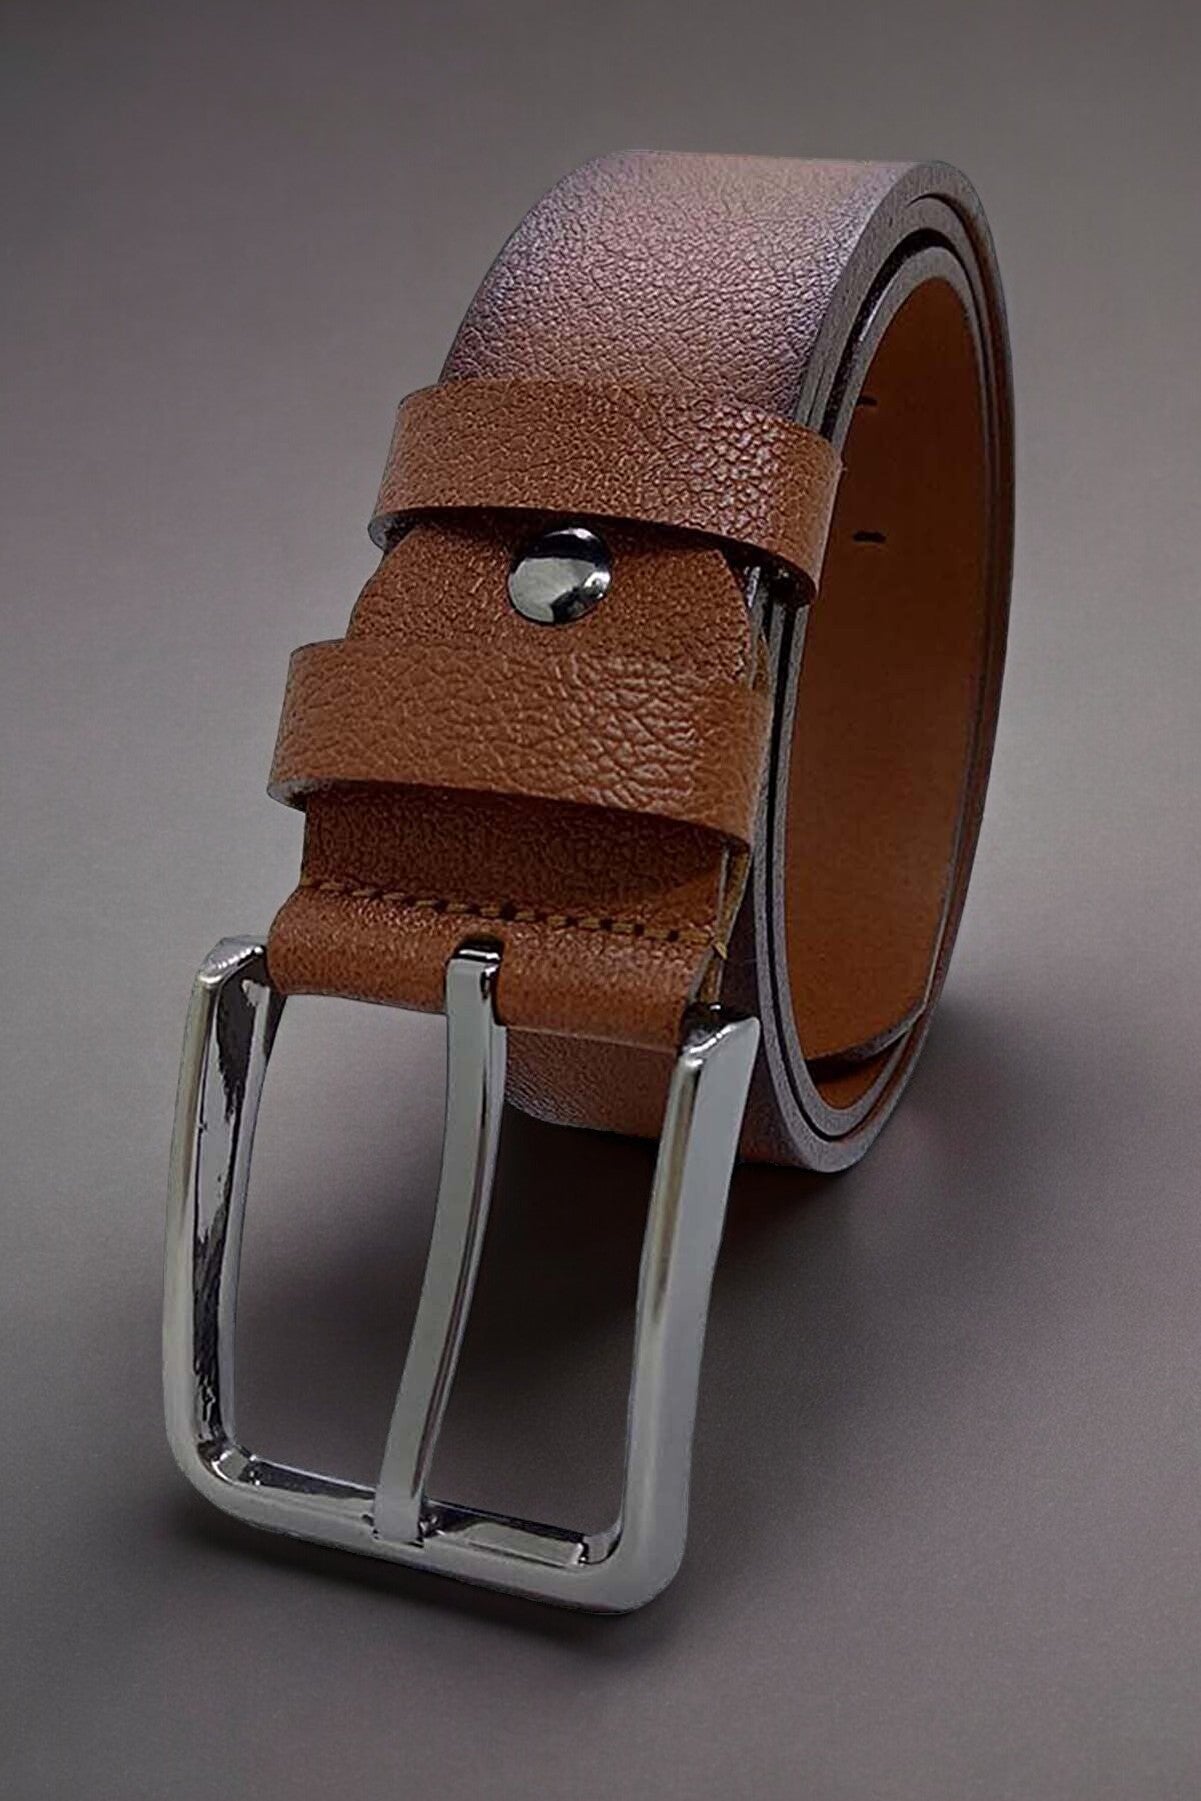 Handmade Leather Belt with Different Color Options  99percenthandmade 32" - 34" Waist inches (70cm-80cm)-Small Brown with Black touches 